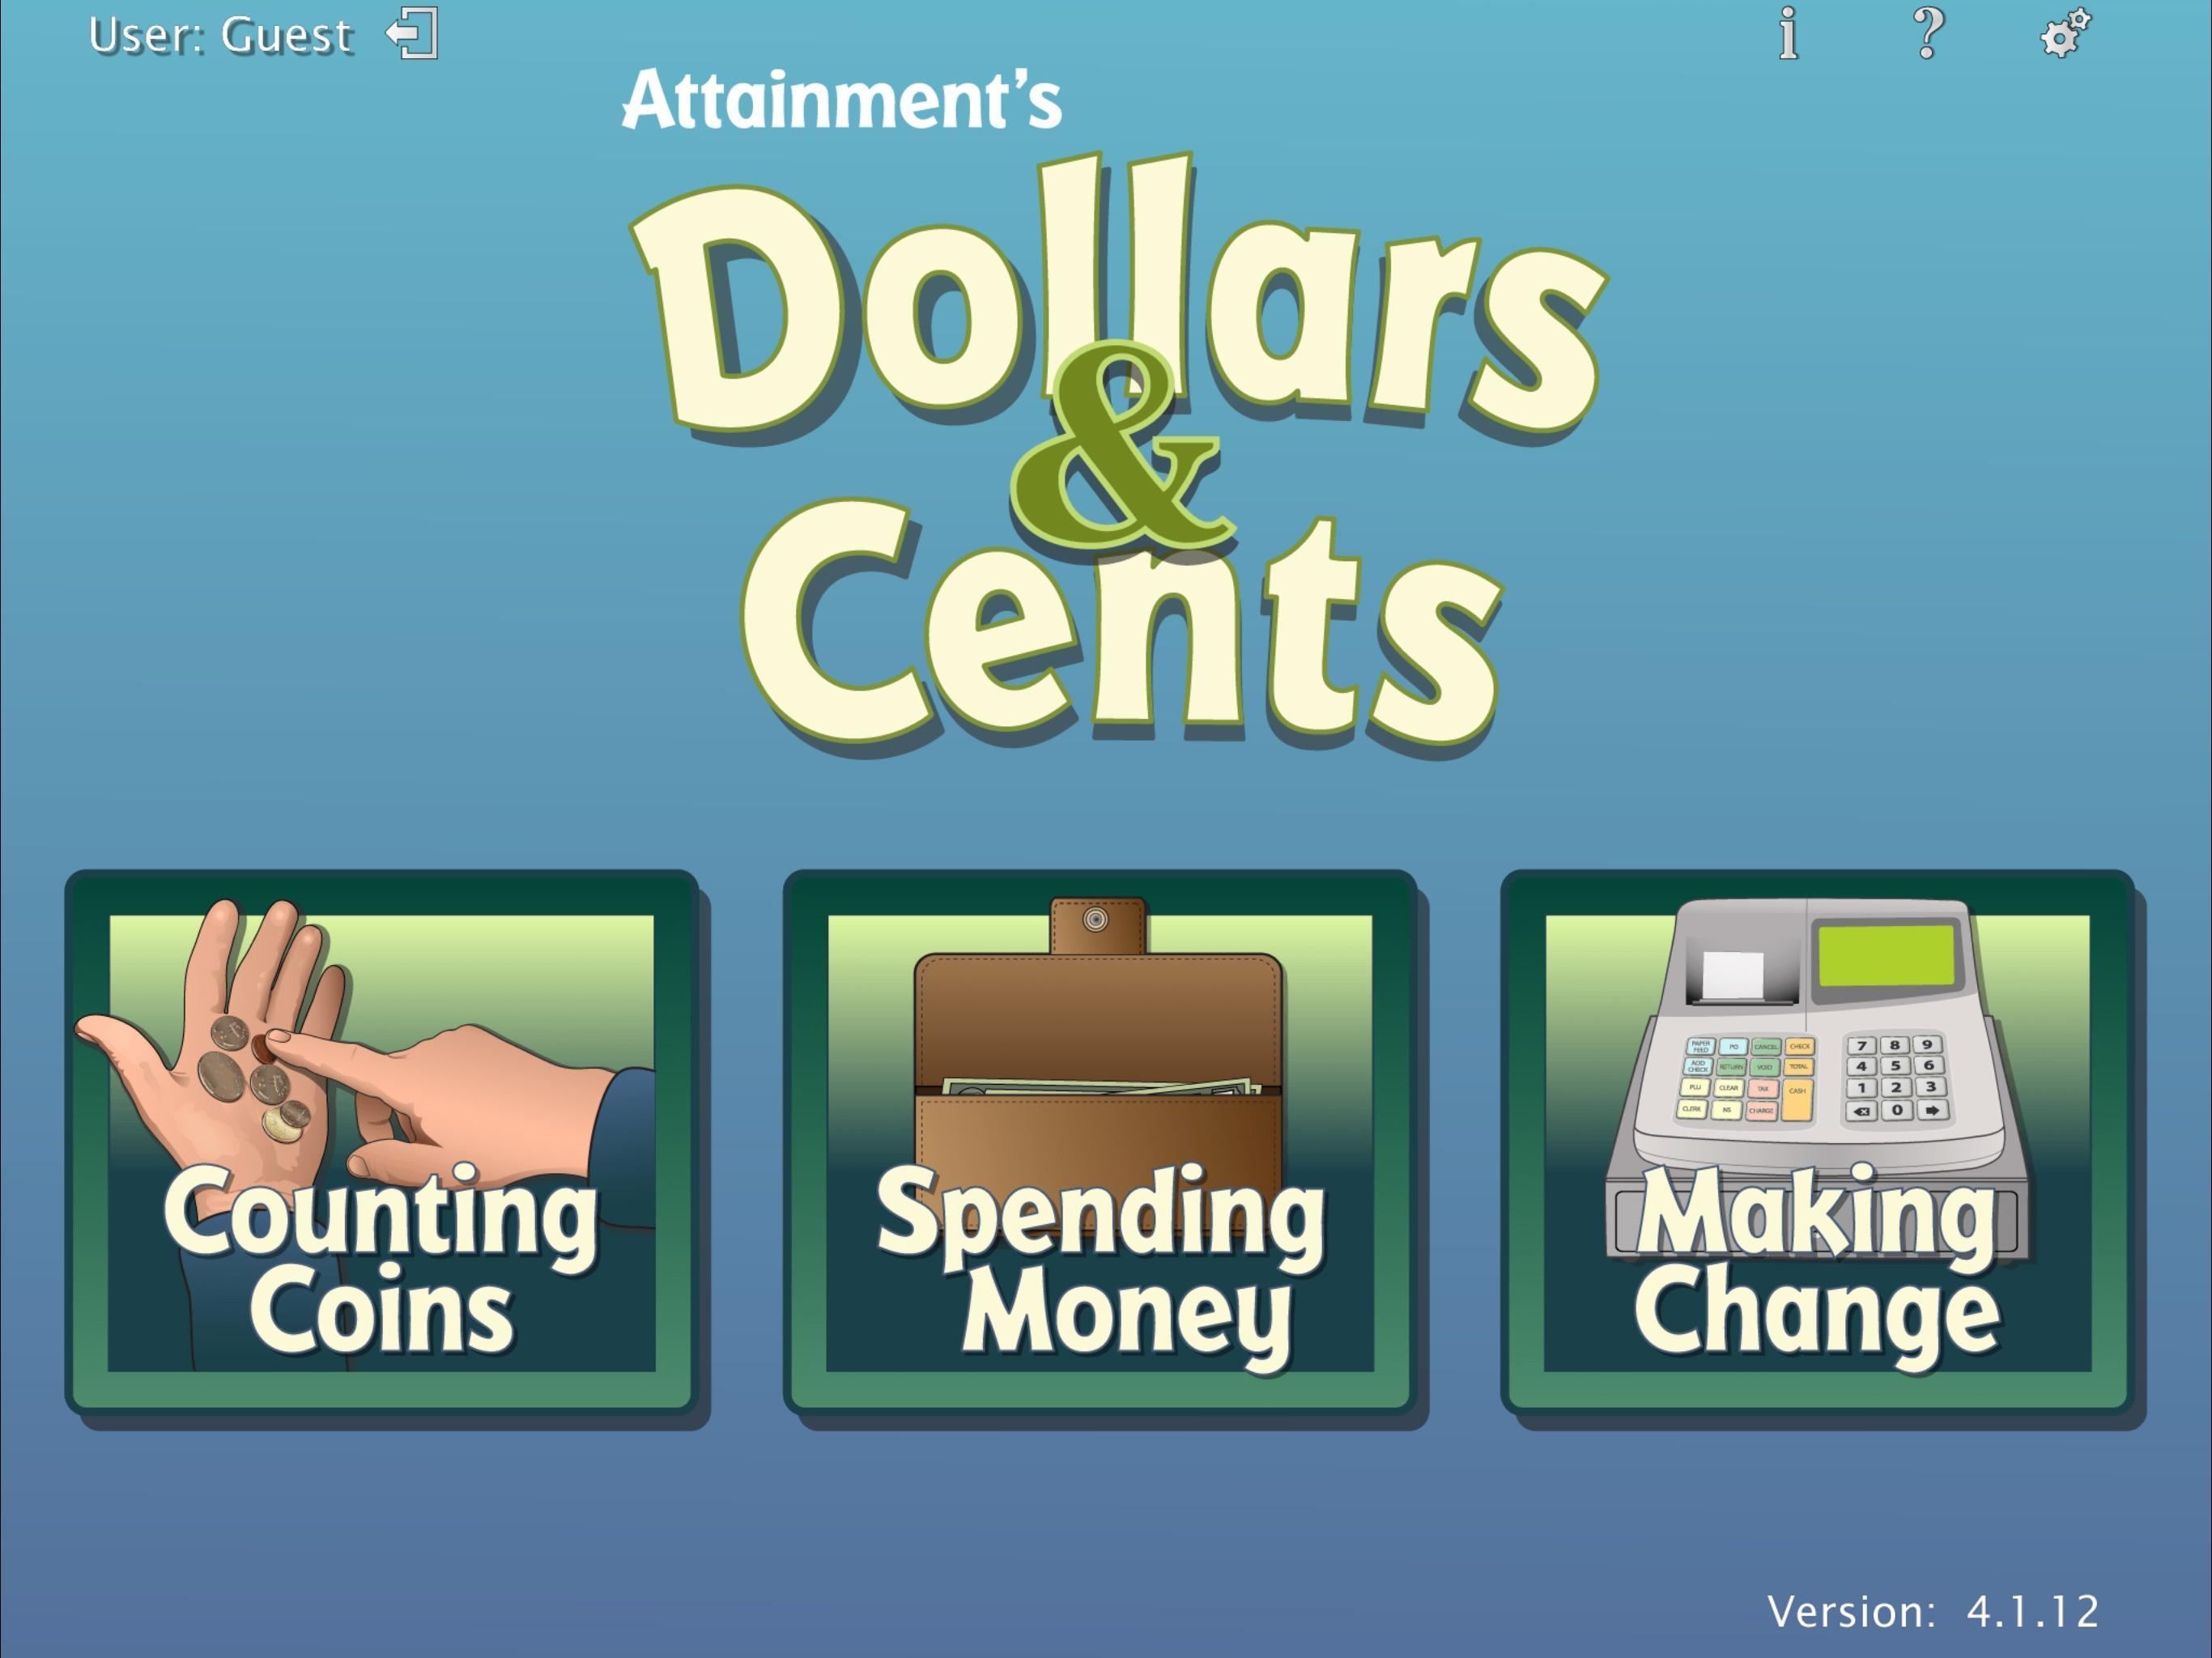 Spend money game. Spend Bill Gates money игра. Dollars and Cents Dictionary. Dollar Plays. Subscriber Boost.